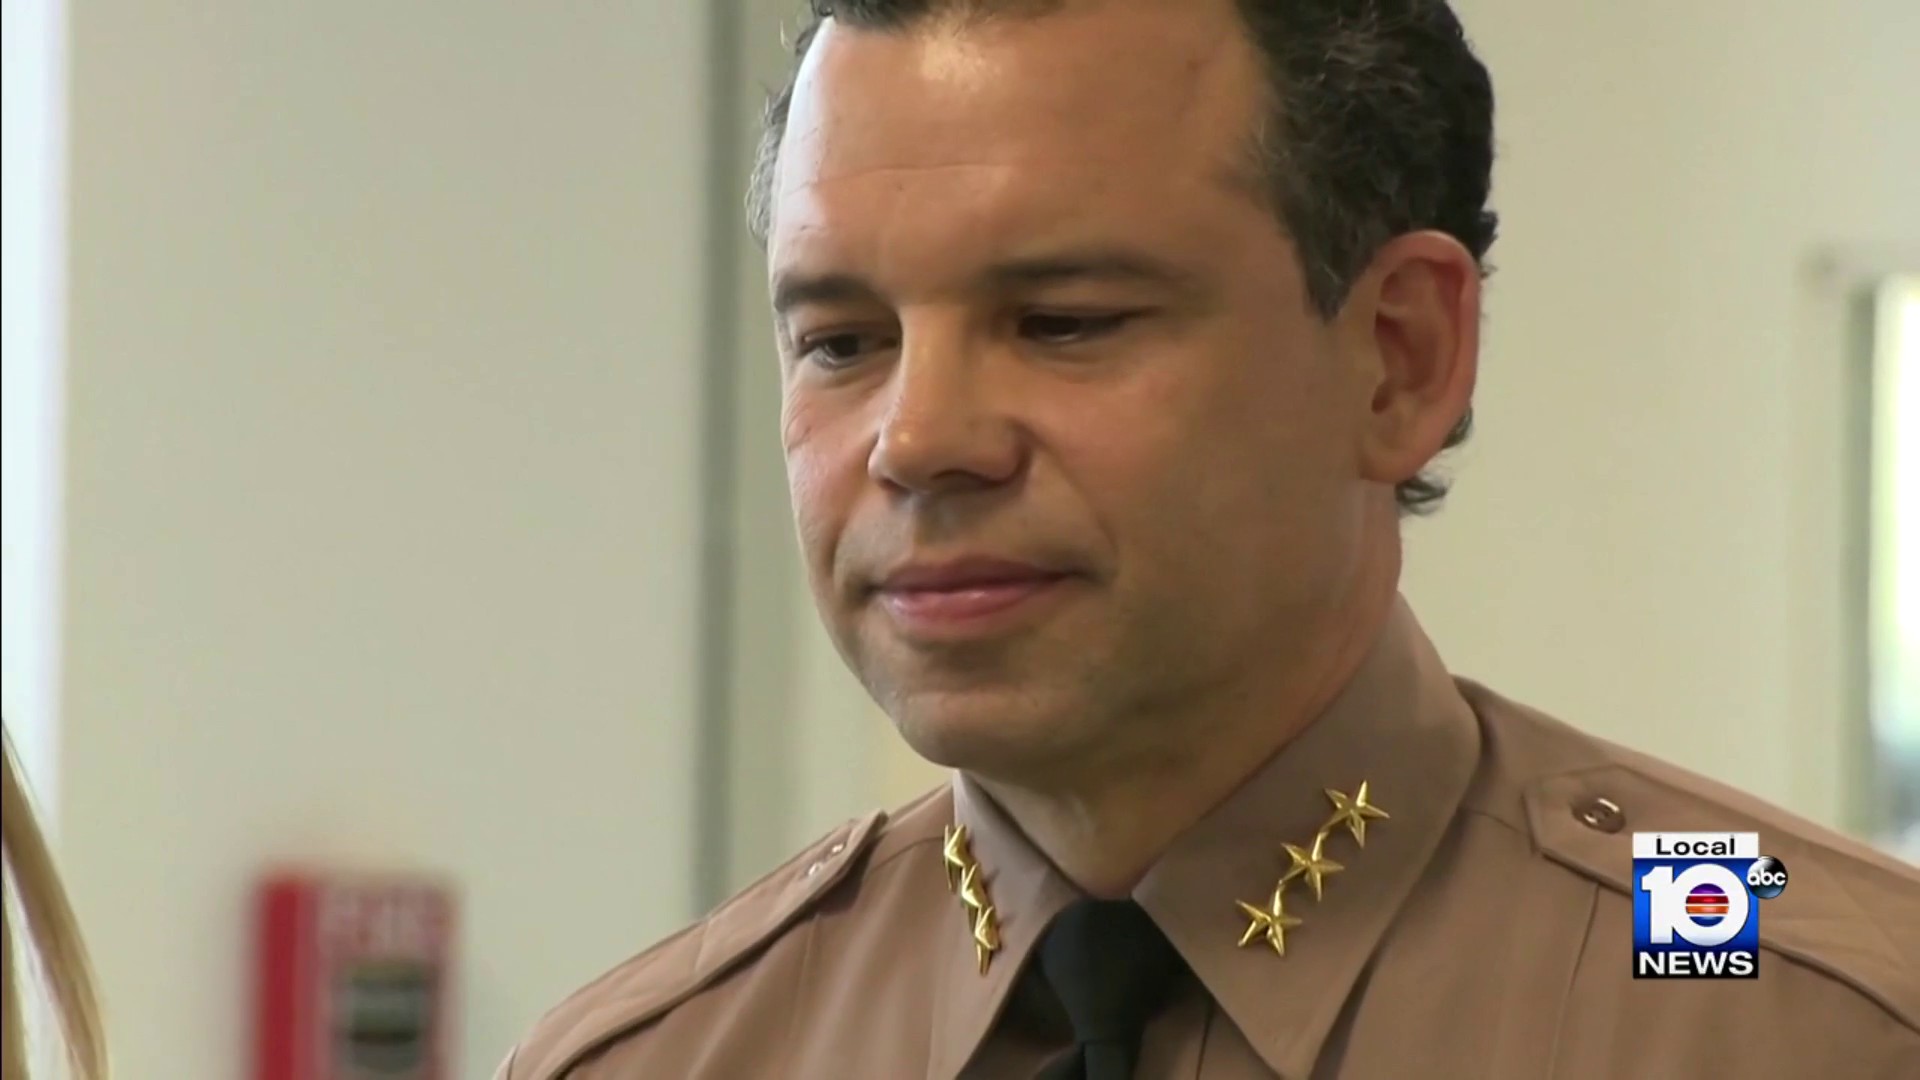 Sources Miami-Dade Police Director Freddy Ramirez has been speaking from hospital image